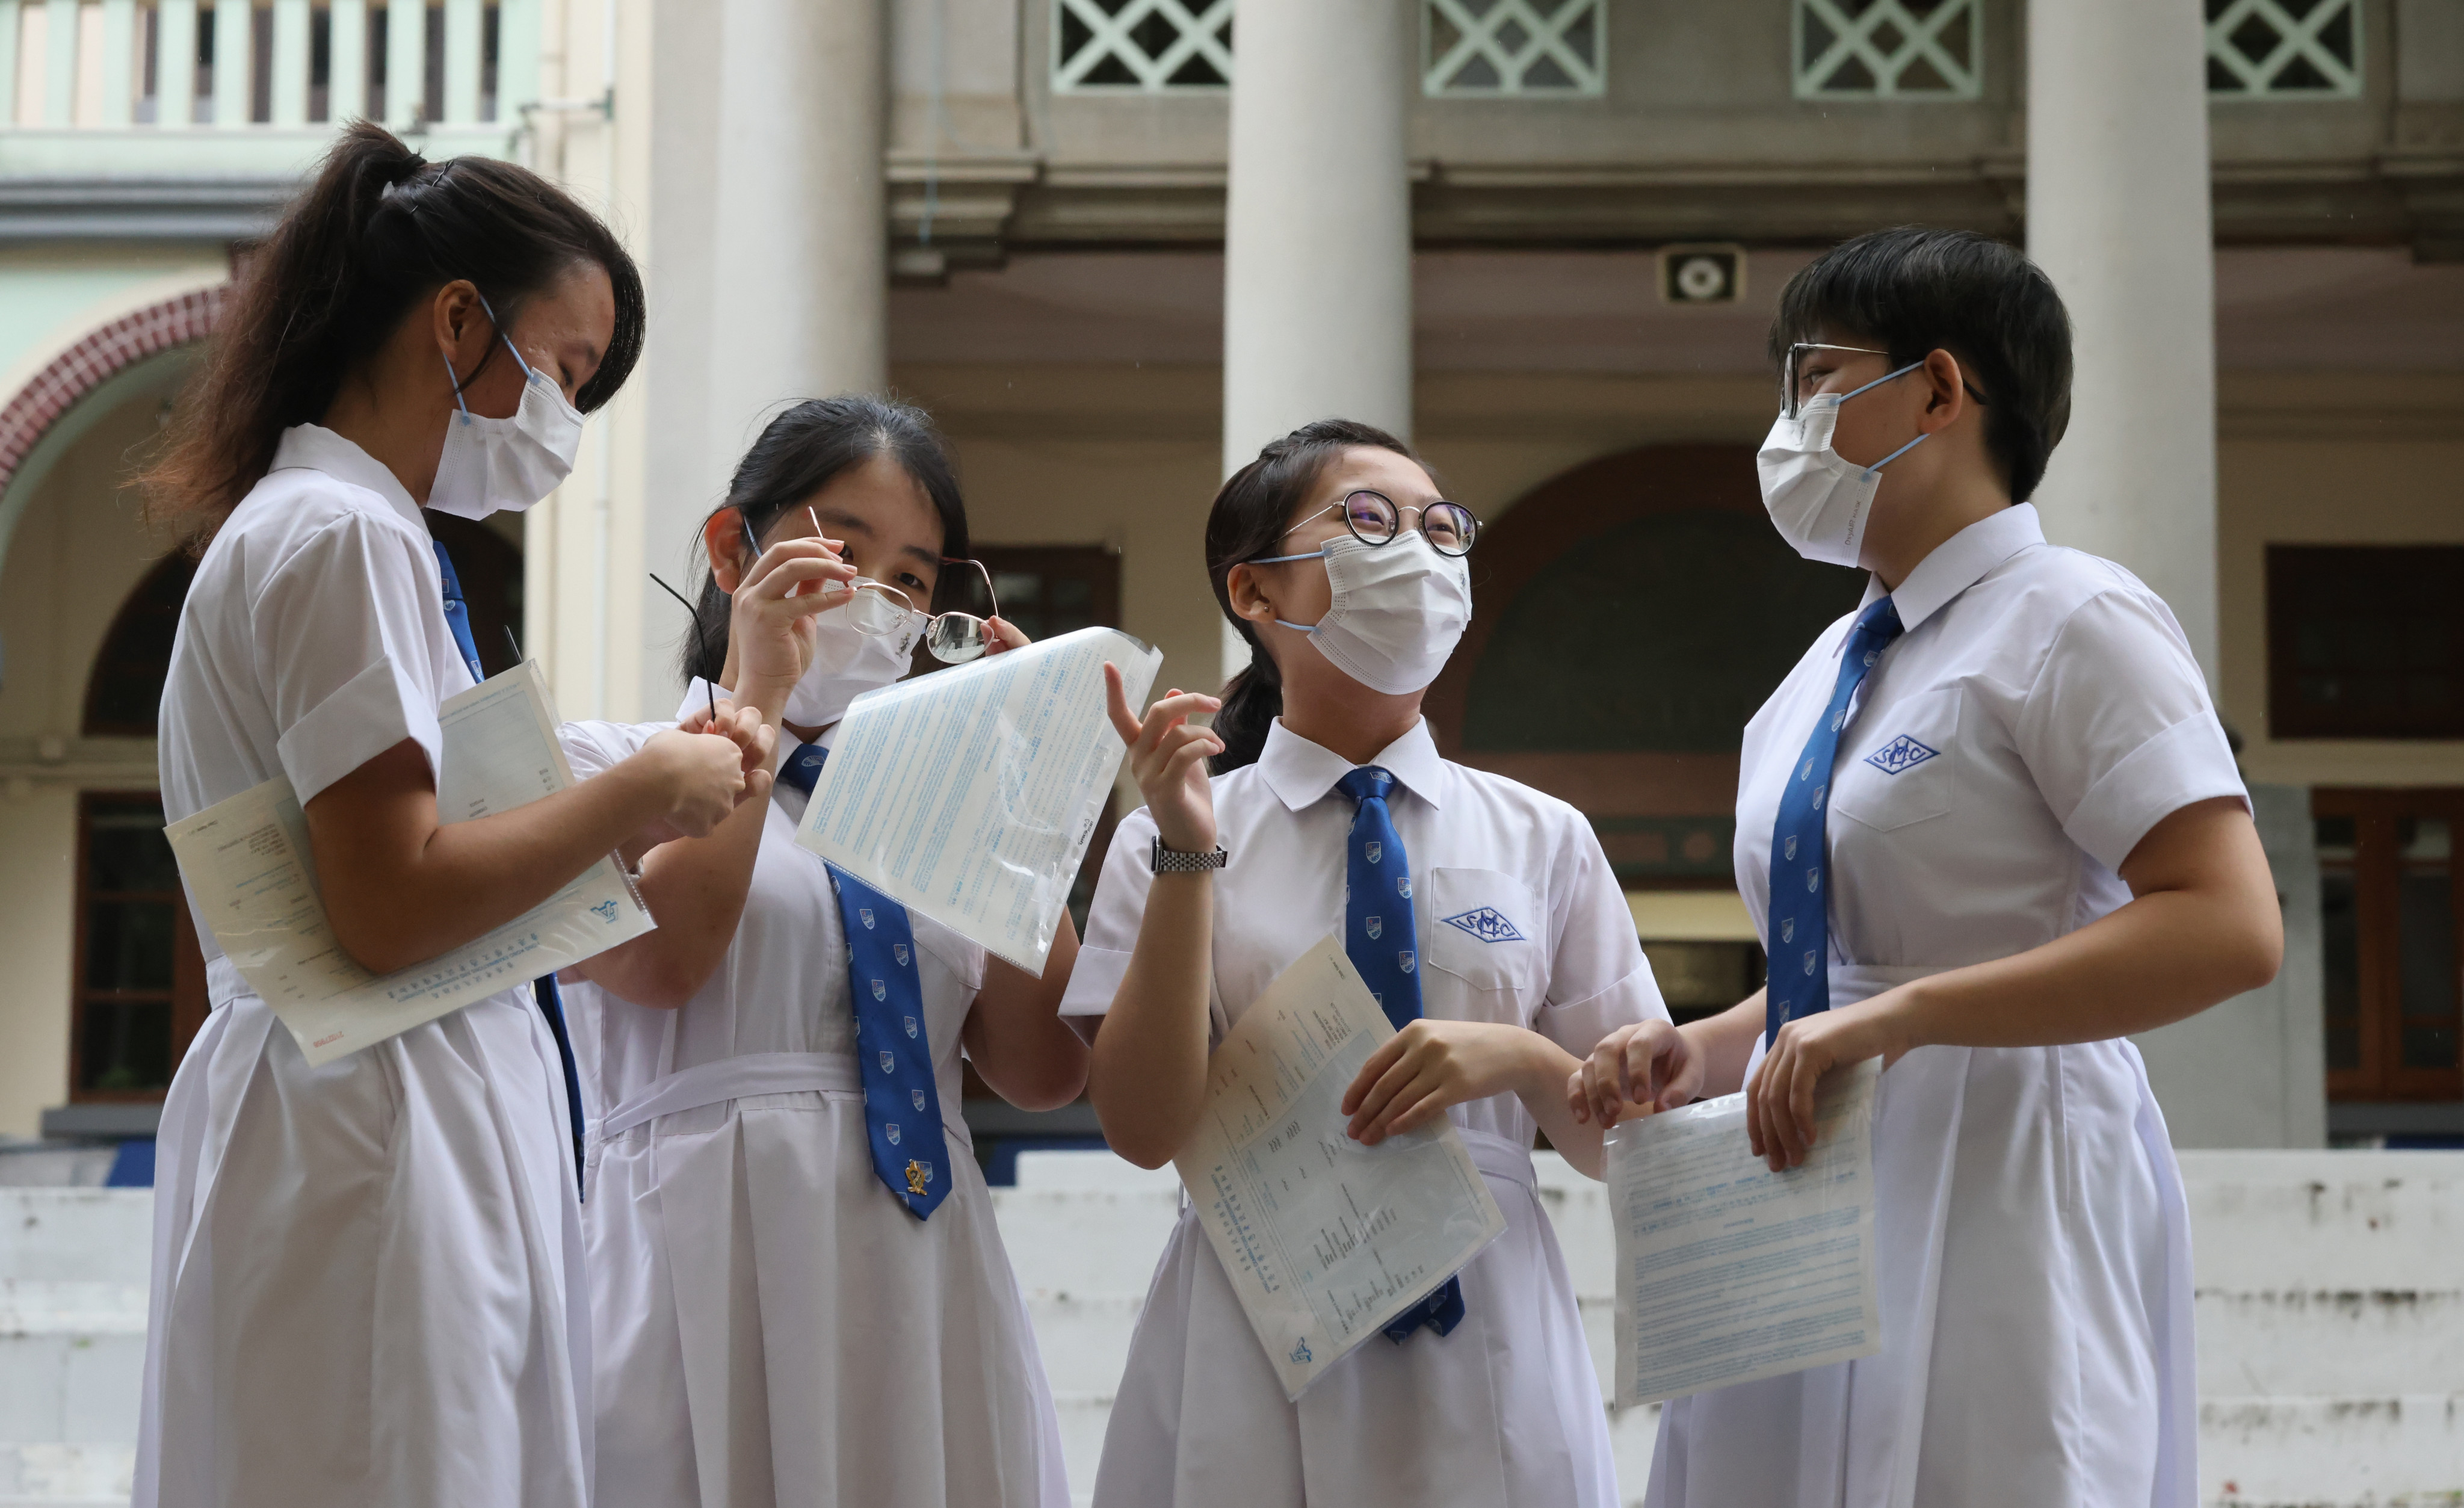 Students at St. Mary’s Canossian College (from left) Charmaine Hung Yuet-yi, Jenna Cheung Yan-ting, Serena Yu Sheung-wing and Jackie Wong Tsz-Li receive their Diploma of Secondary Education examination results on July 21. Photo: May Tse